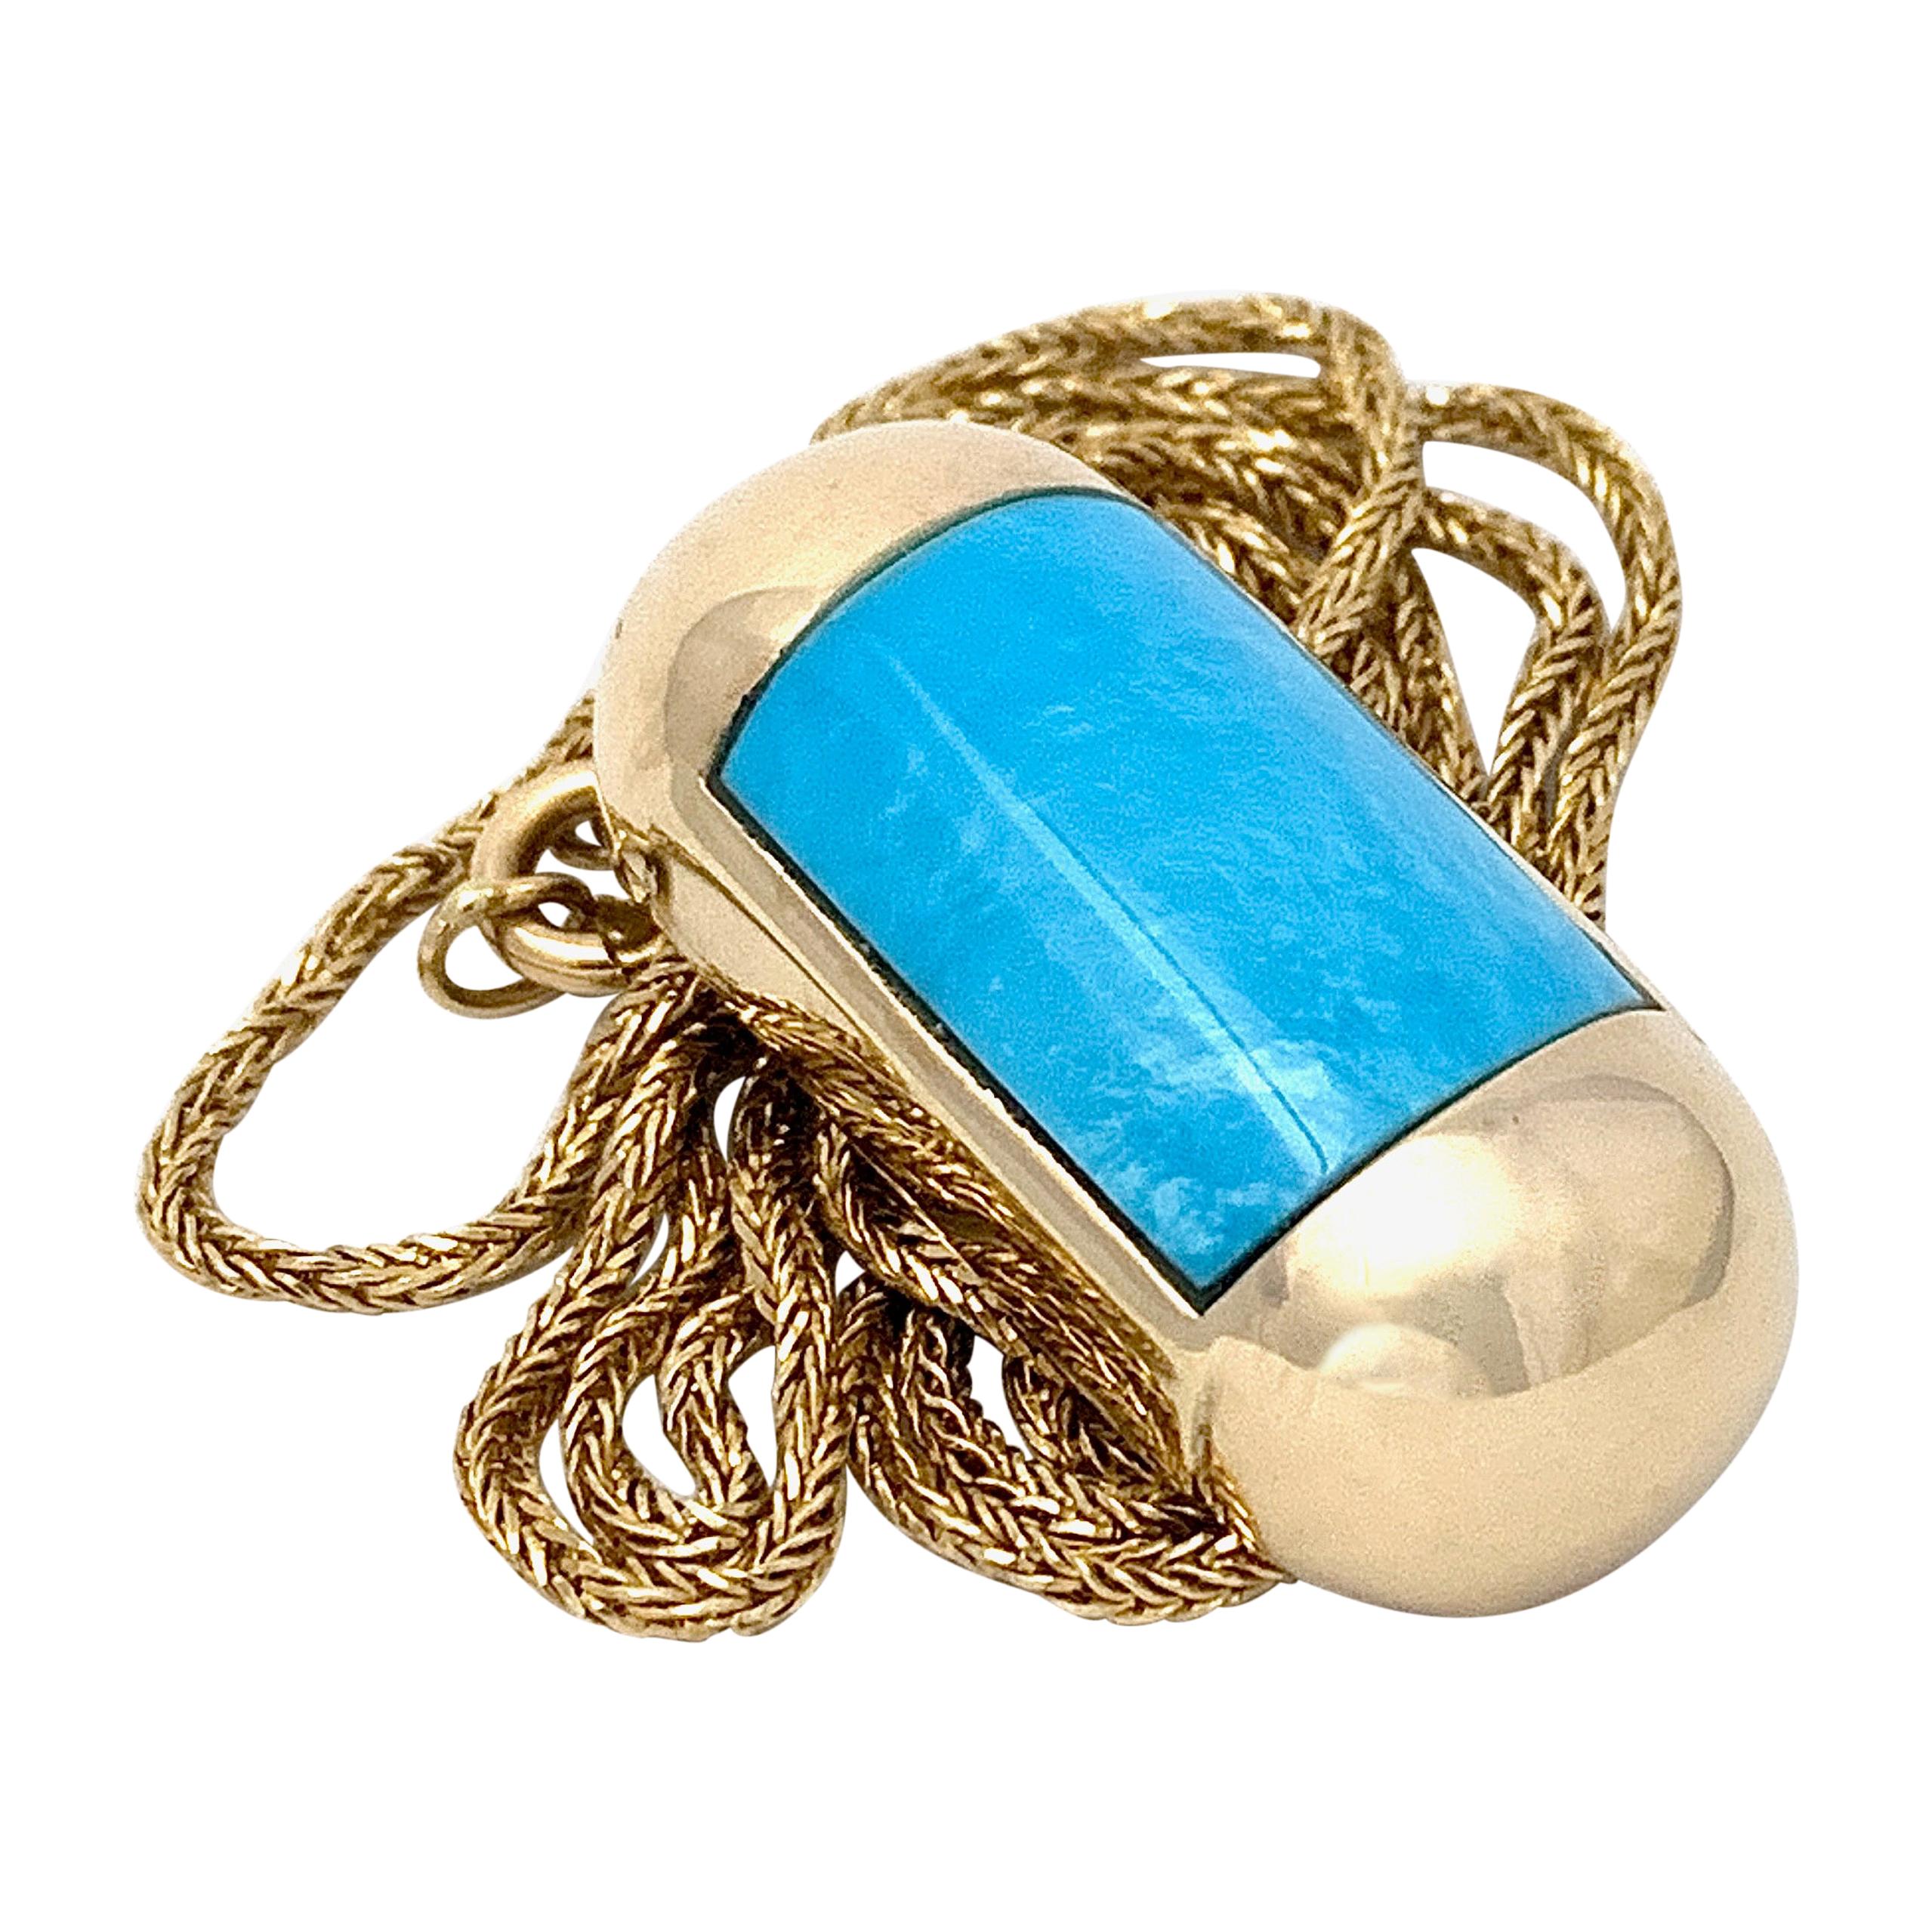 "Maximoto" Sleeping Beauty Turquoise Bullet Pendant in Gold with Long Rope Chain